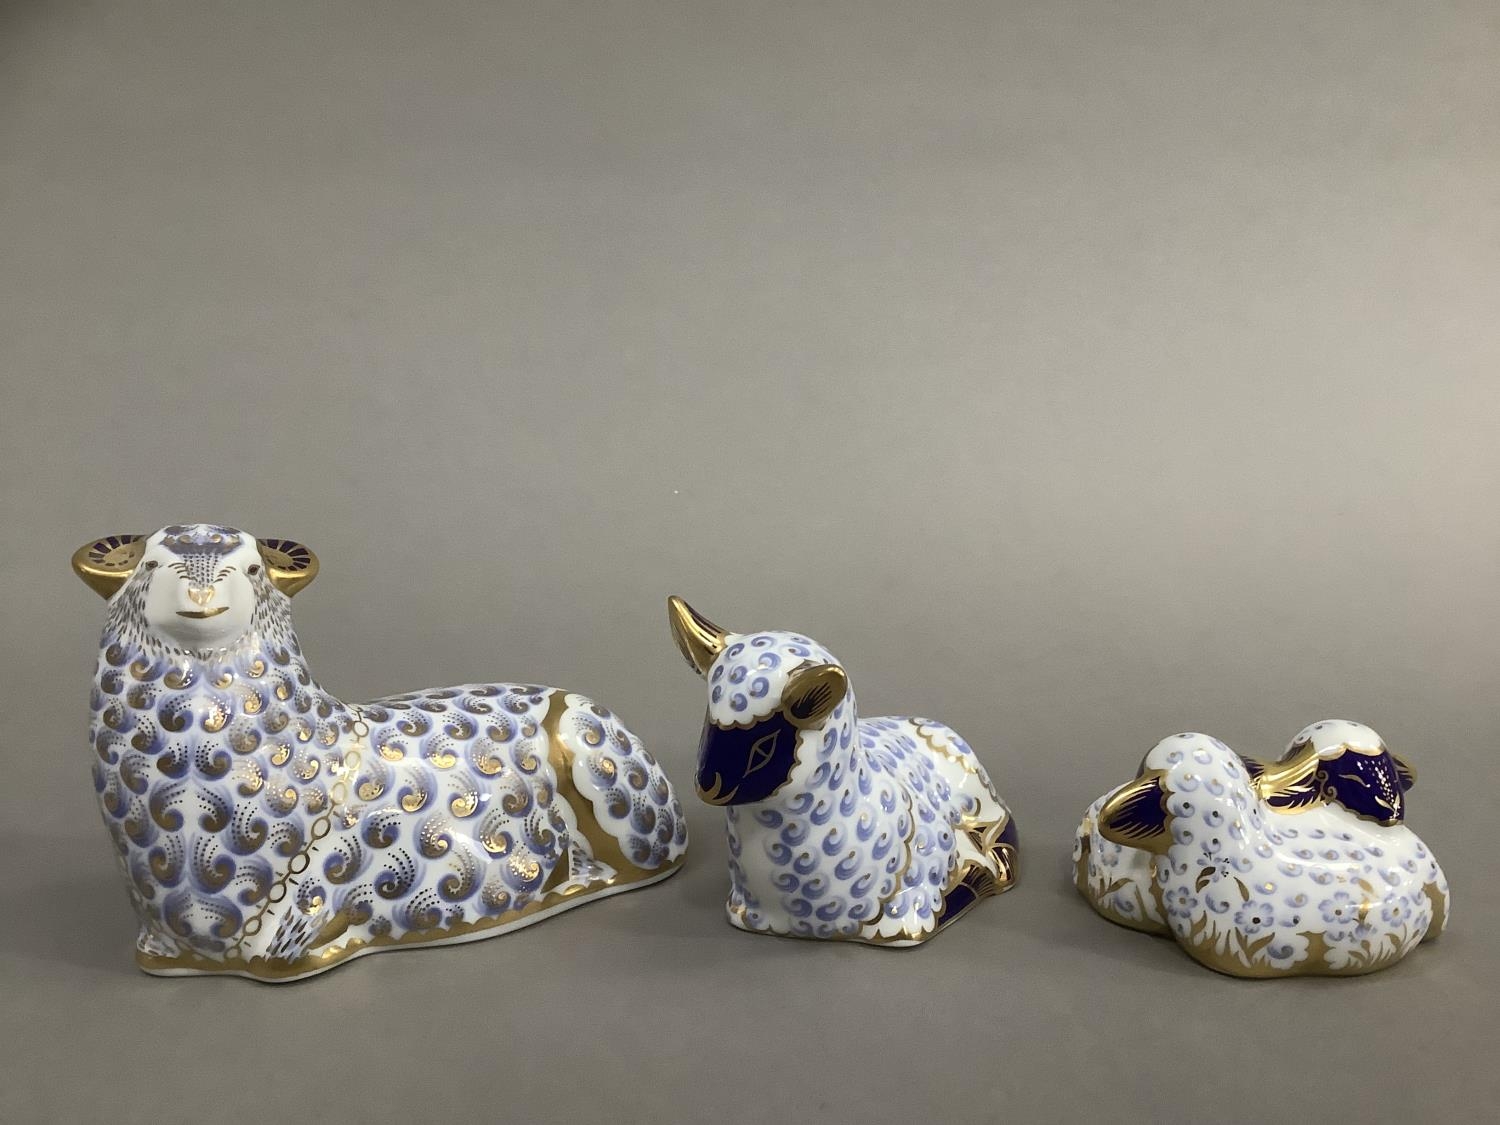 A Royal Crown Derby ram, ewe and two lambs, silver buttons (3) 7.5cm, 6.5cm and 4 cm high - Image 2 of 5